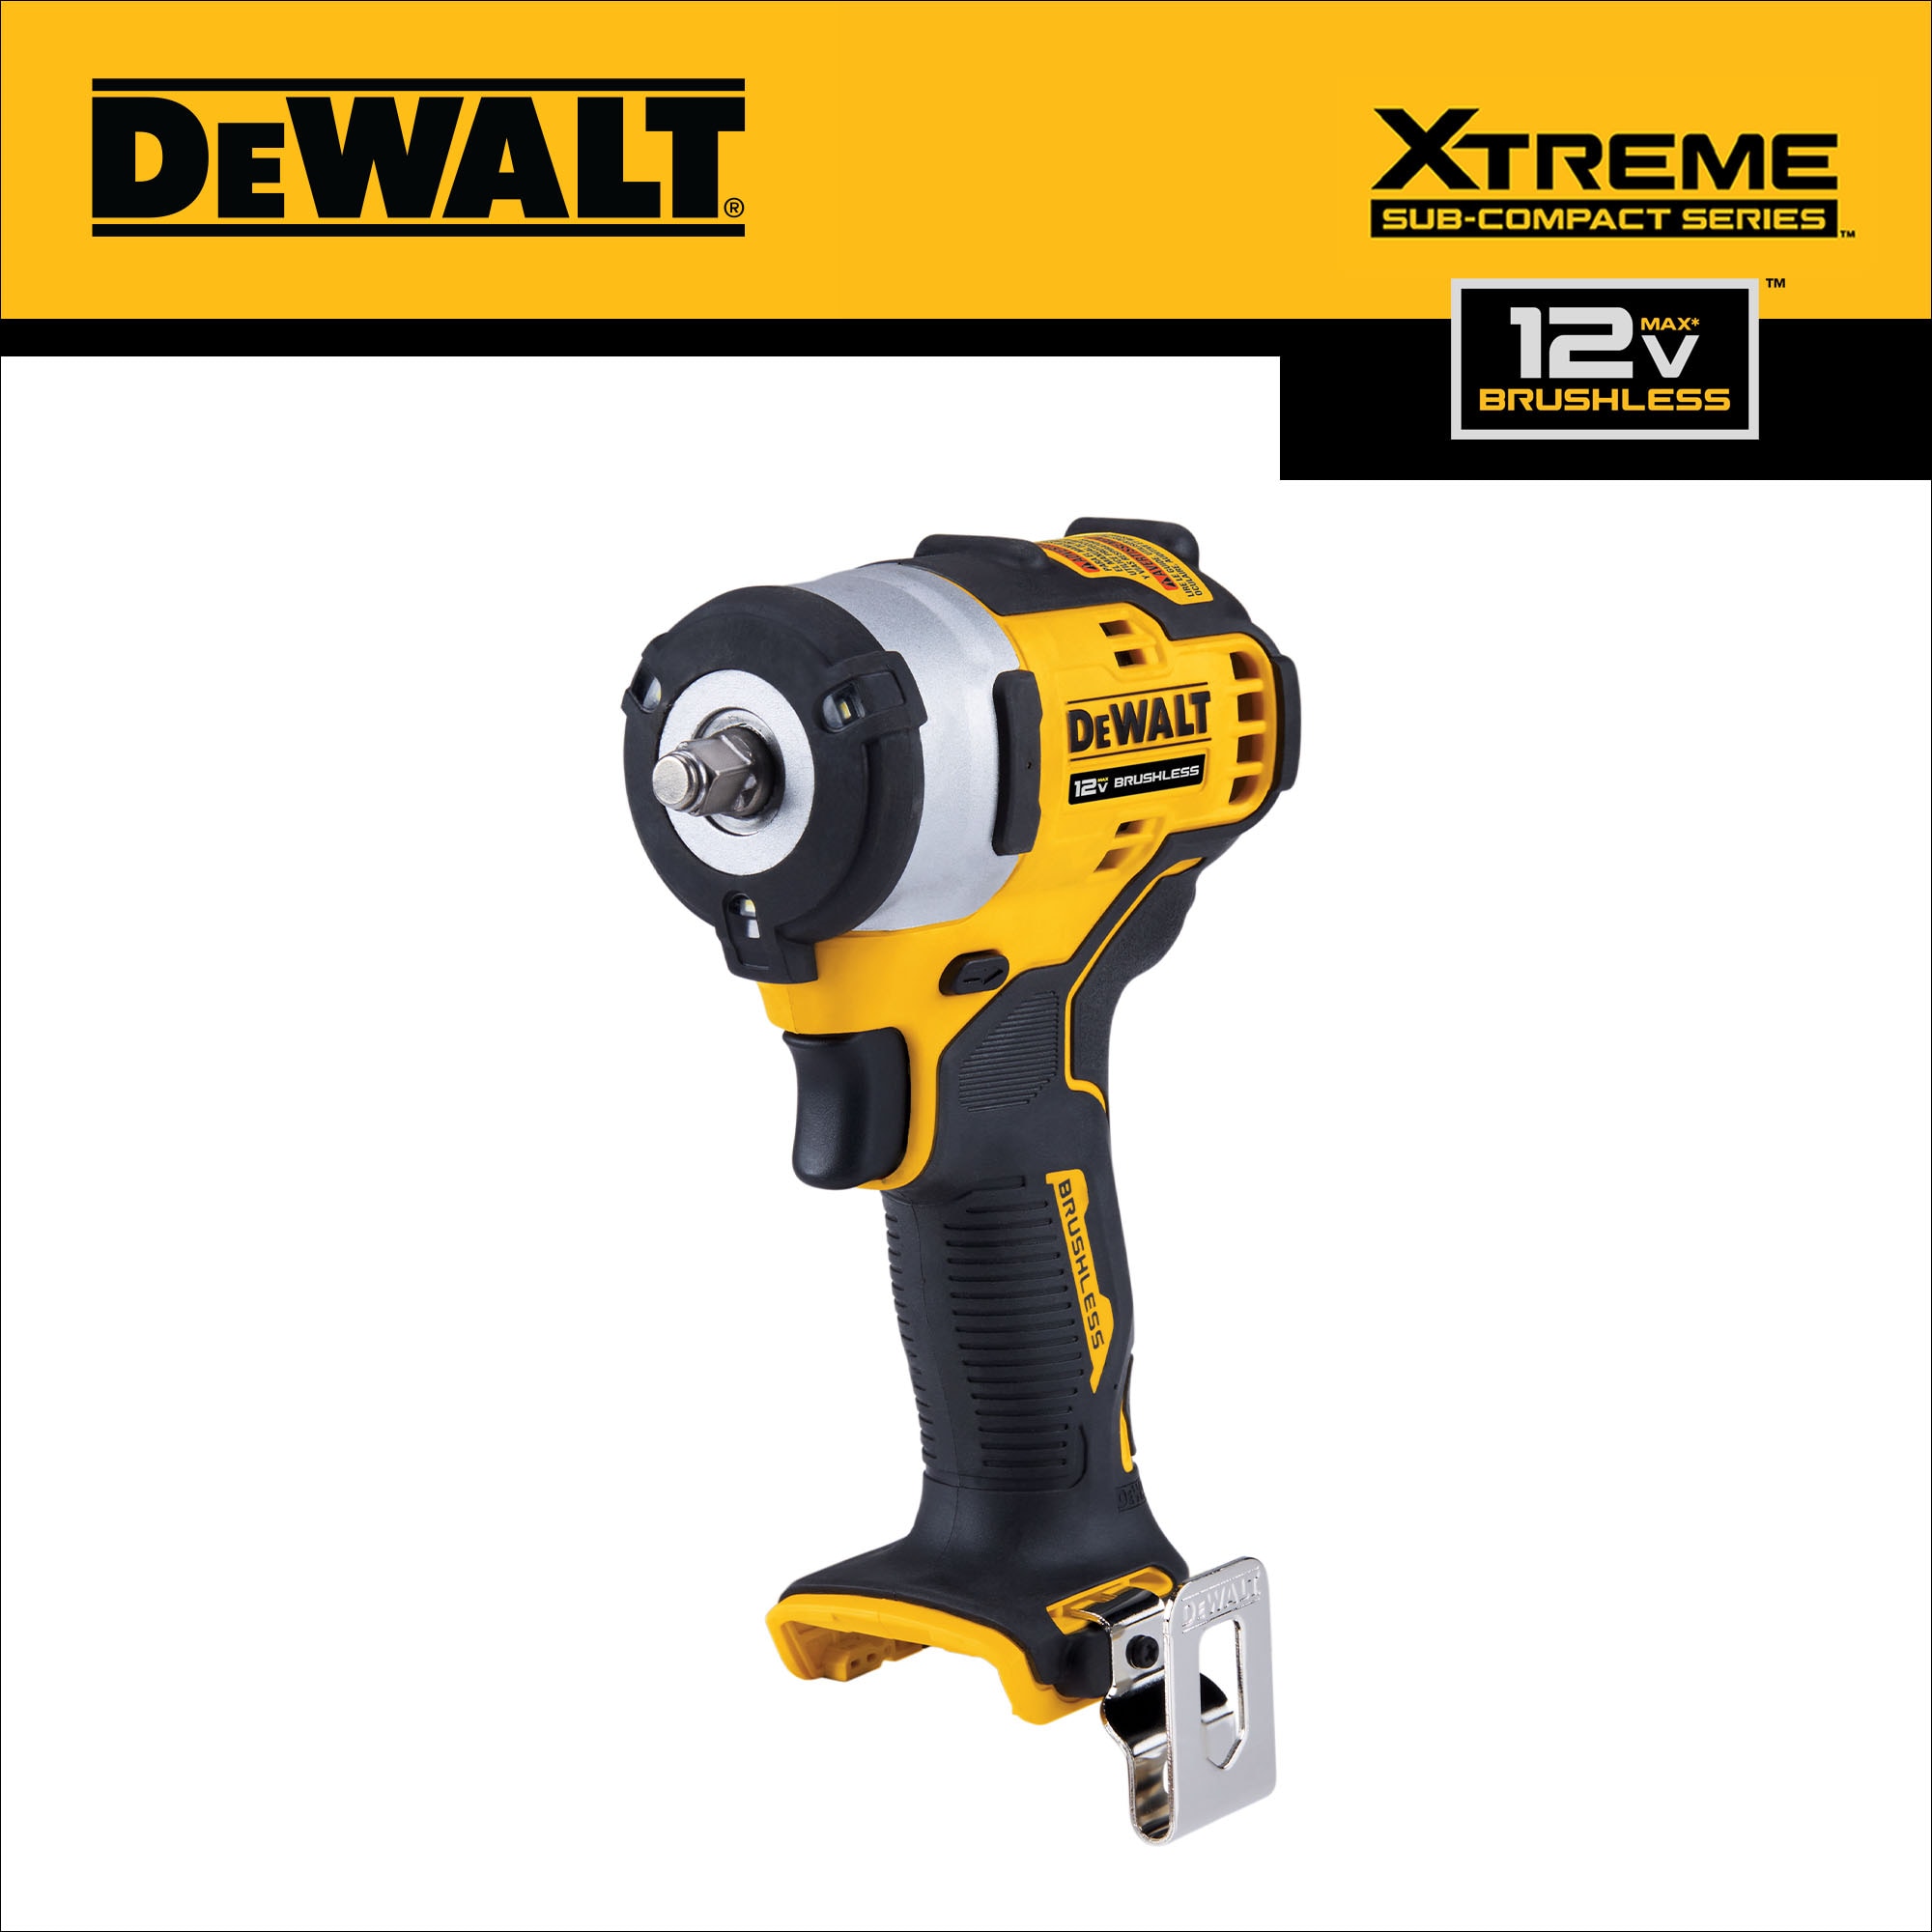 ilt Orient prosa DEWALT XTREME 12-volt Max Variable Speed Brushless 3/8-in Drive Cordless  Impact Wrench (Bare Tool) in the Impact Wrenches department at Lowes.com